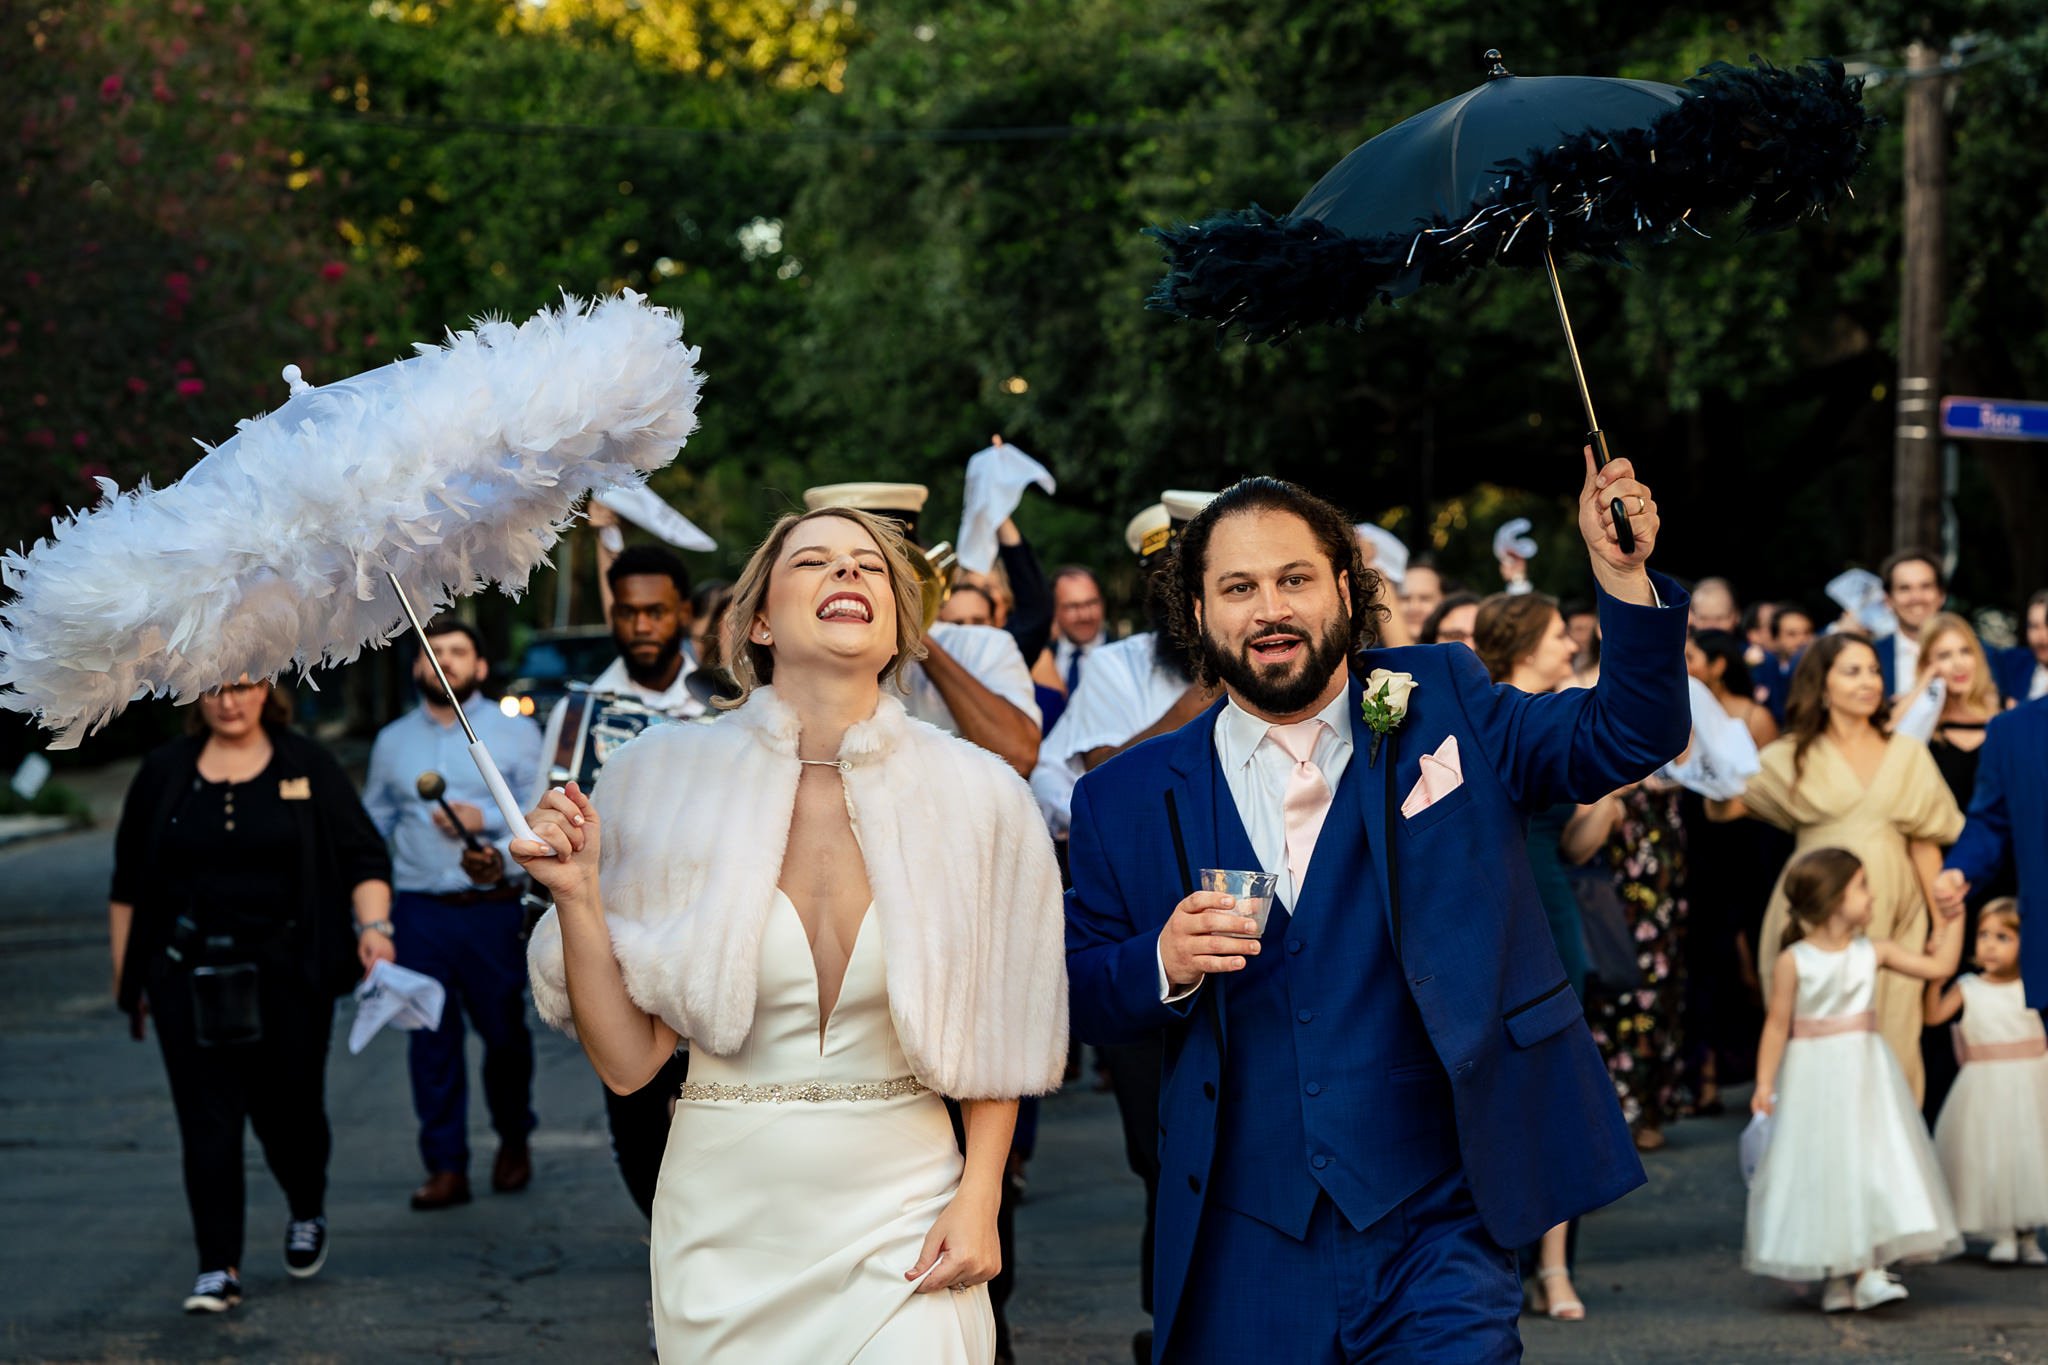 A bride and groom, captured by Asheville, NC photographer Michael Freas, gracefully stroll down the street while holding parasols.